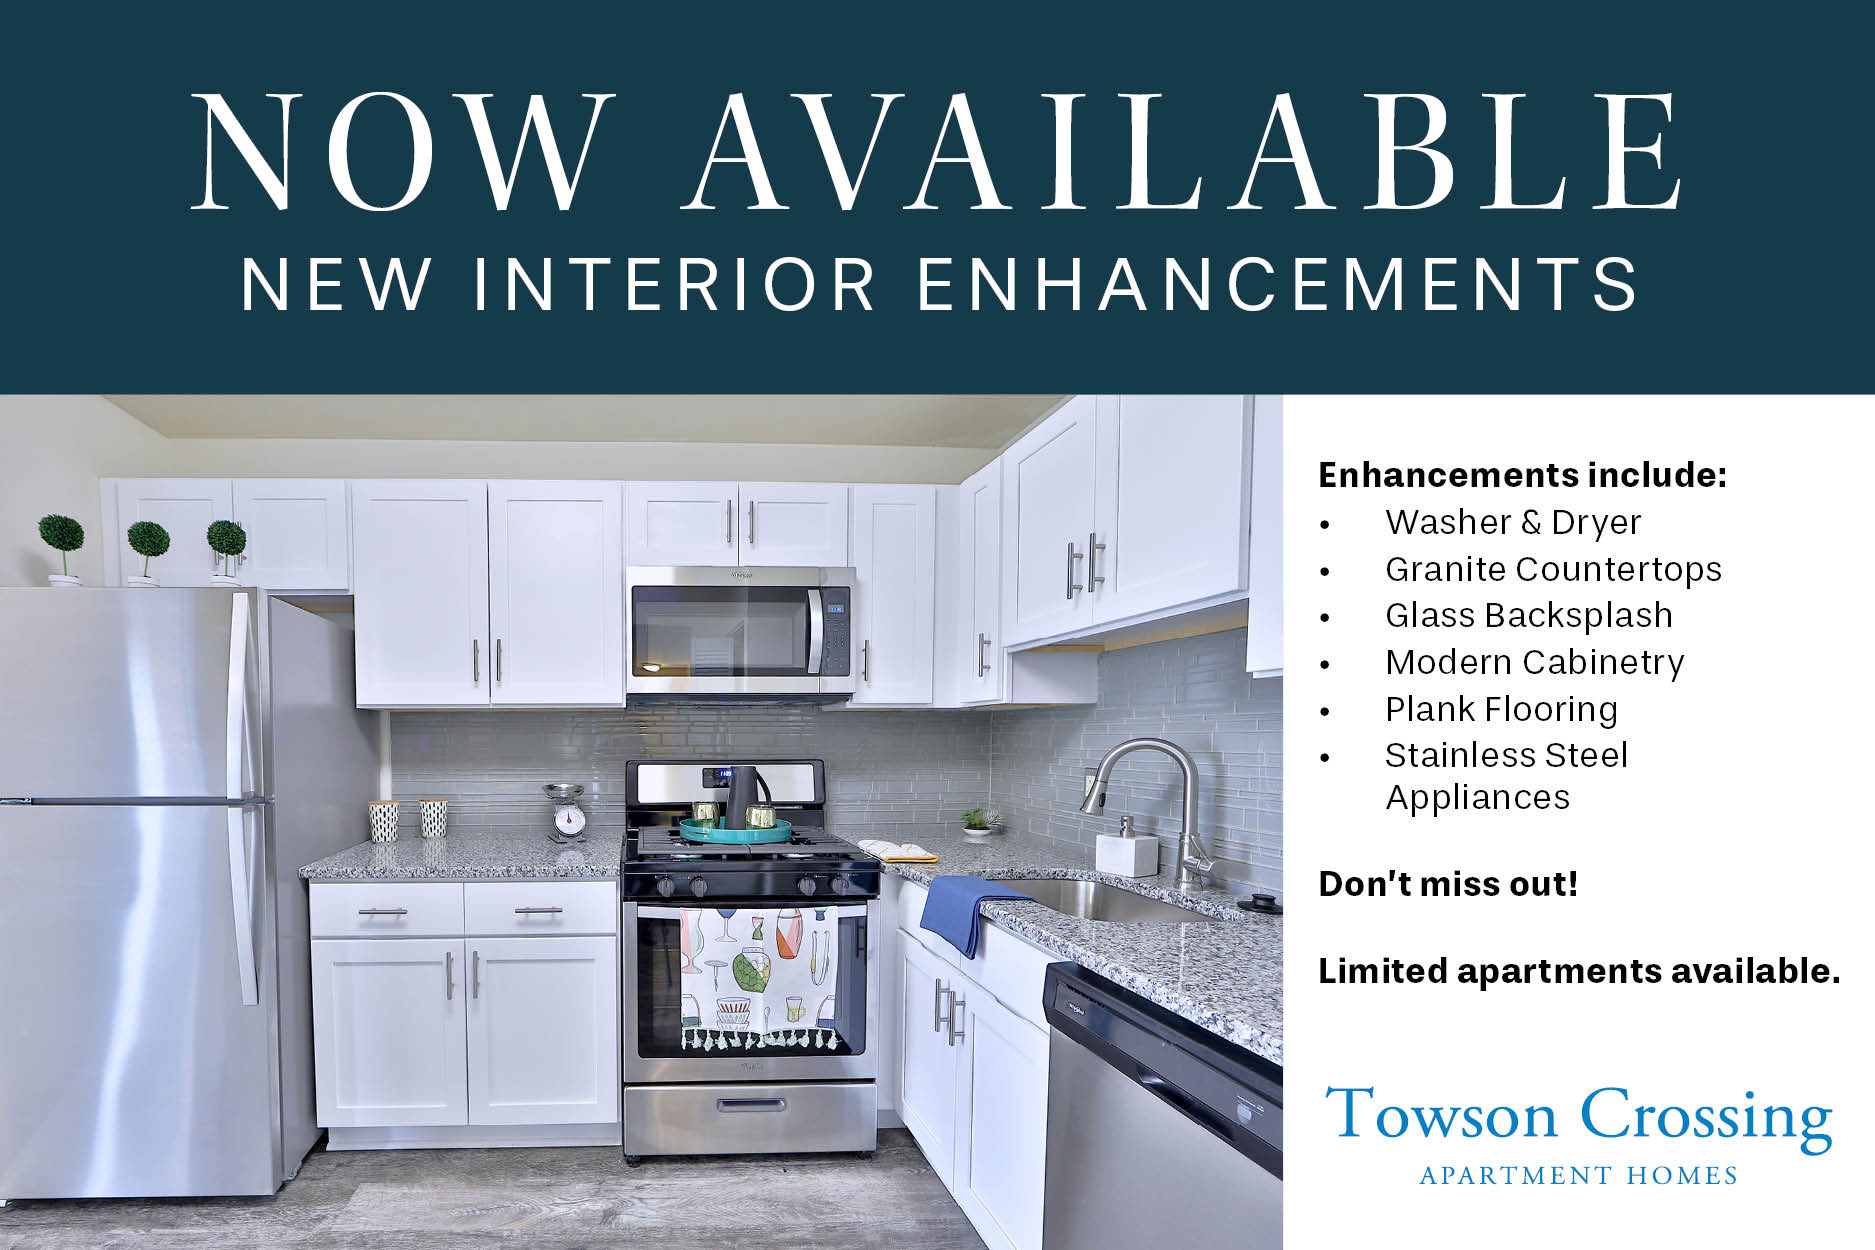 Towson Crossing Apartment Homes enhancement promotion graphic